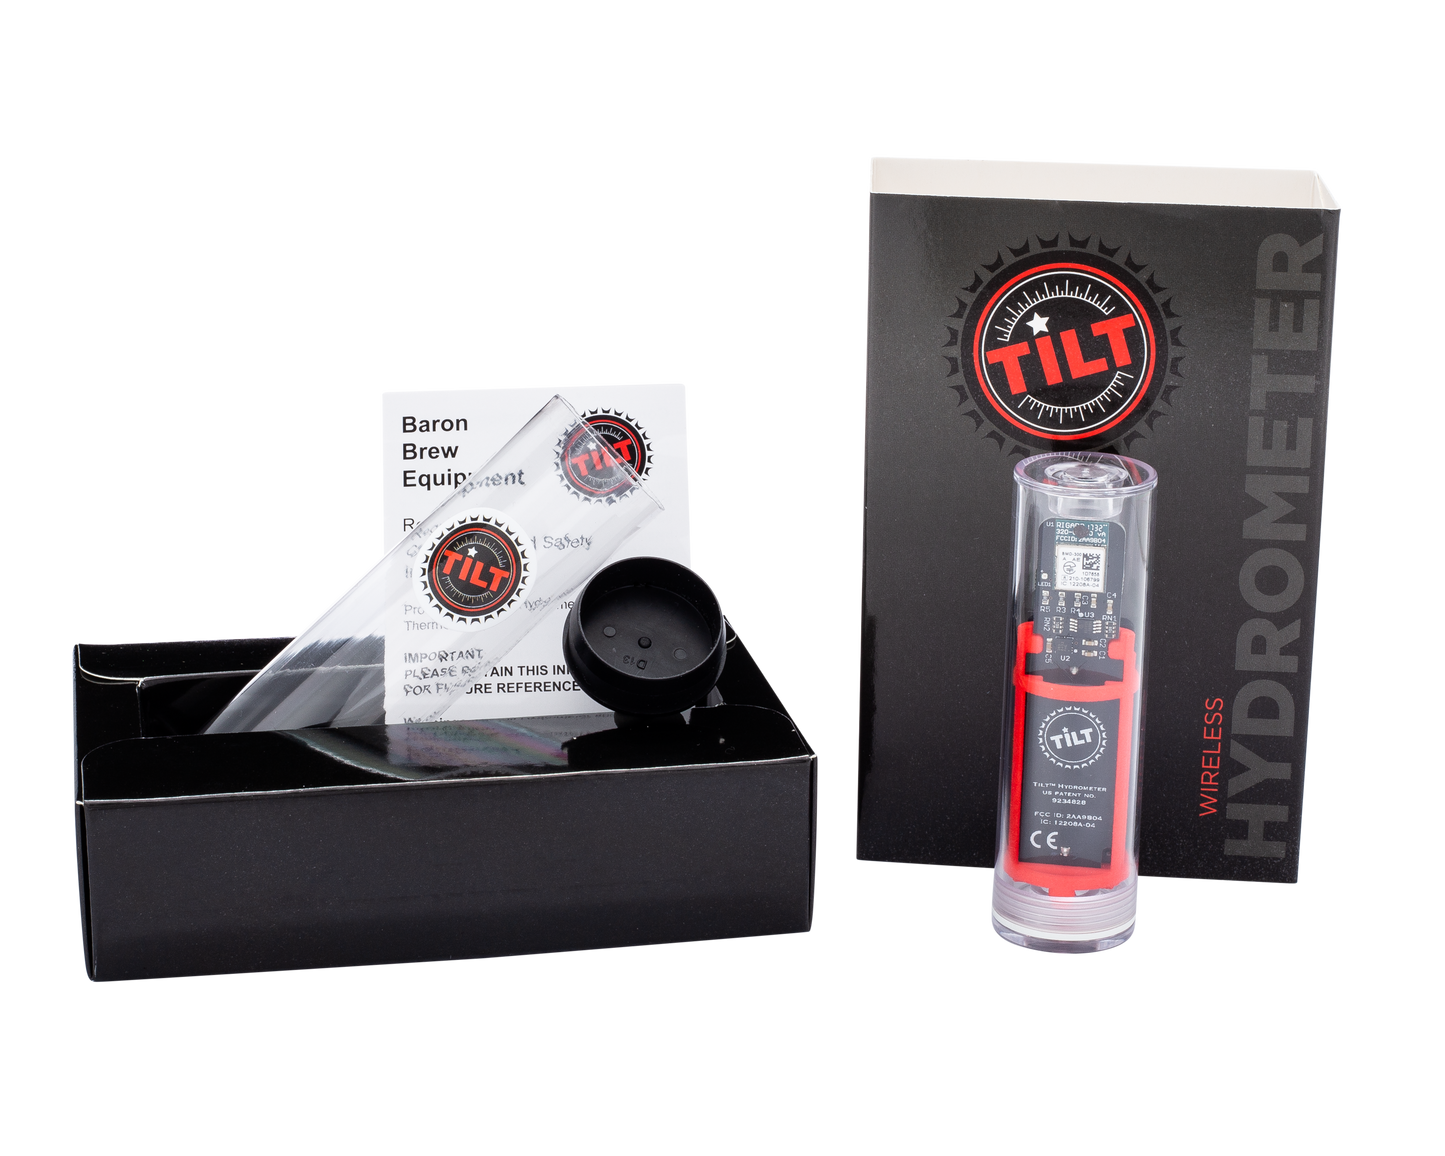 TILT™ Hydrometer and Thermometer - Purple